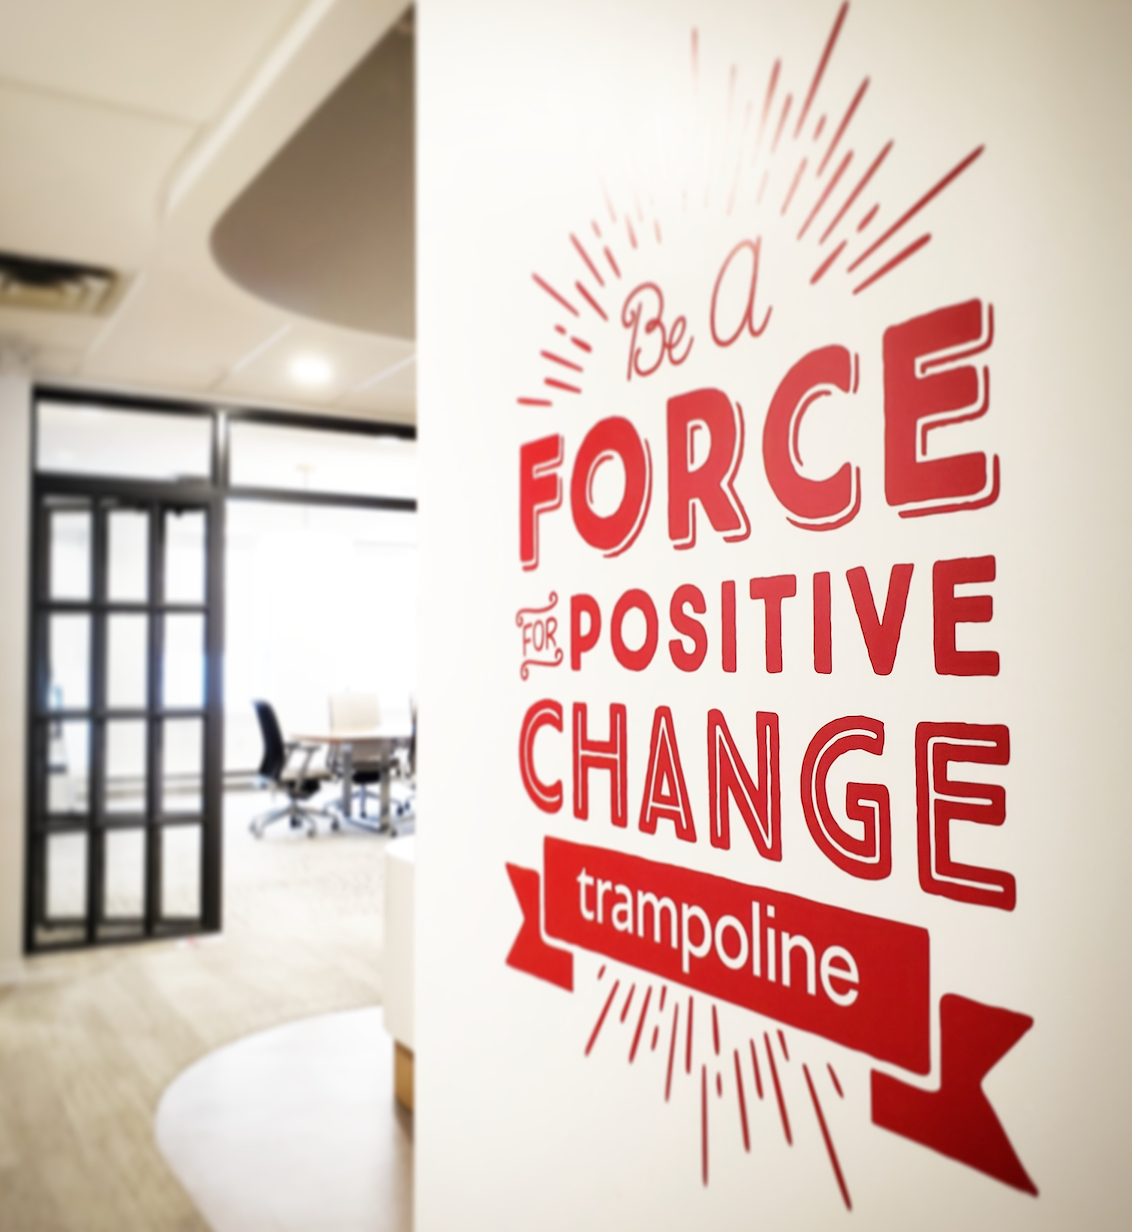 Wall decal with red text "Be a Force for Positive Change" placed beside Trampoline boardroom